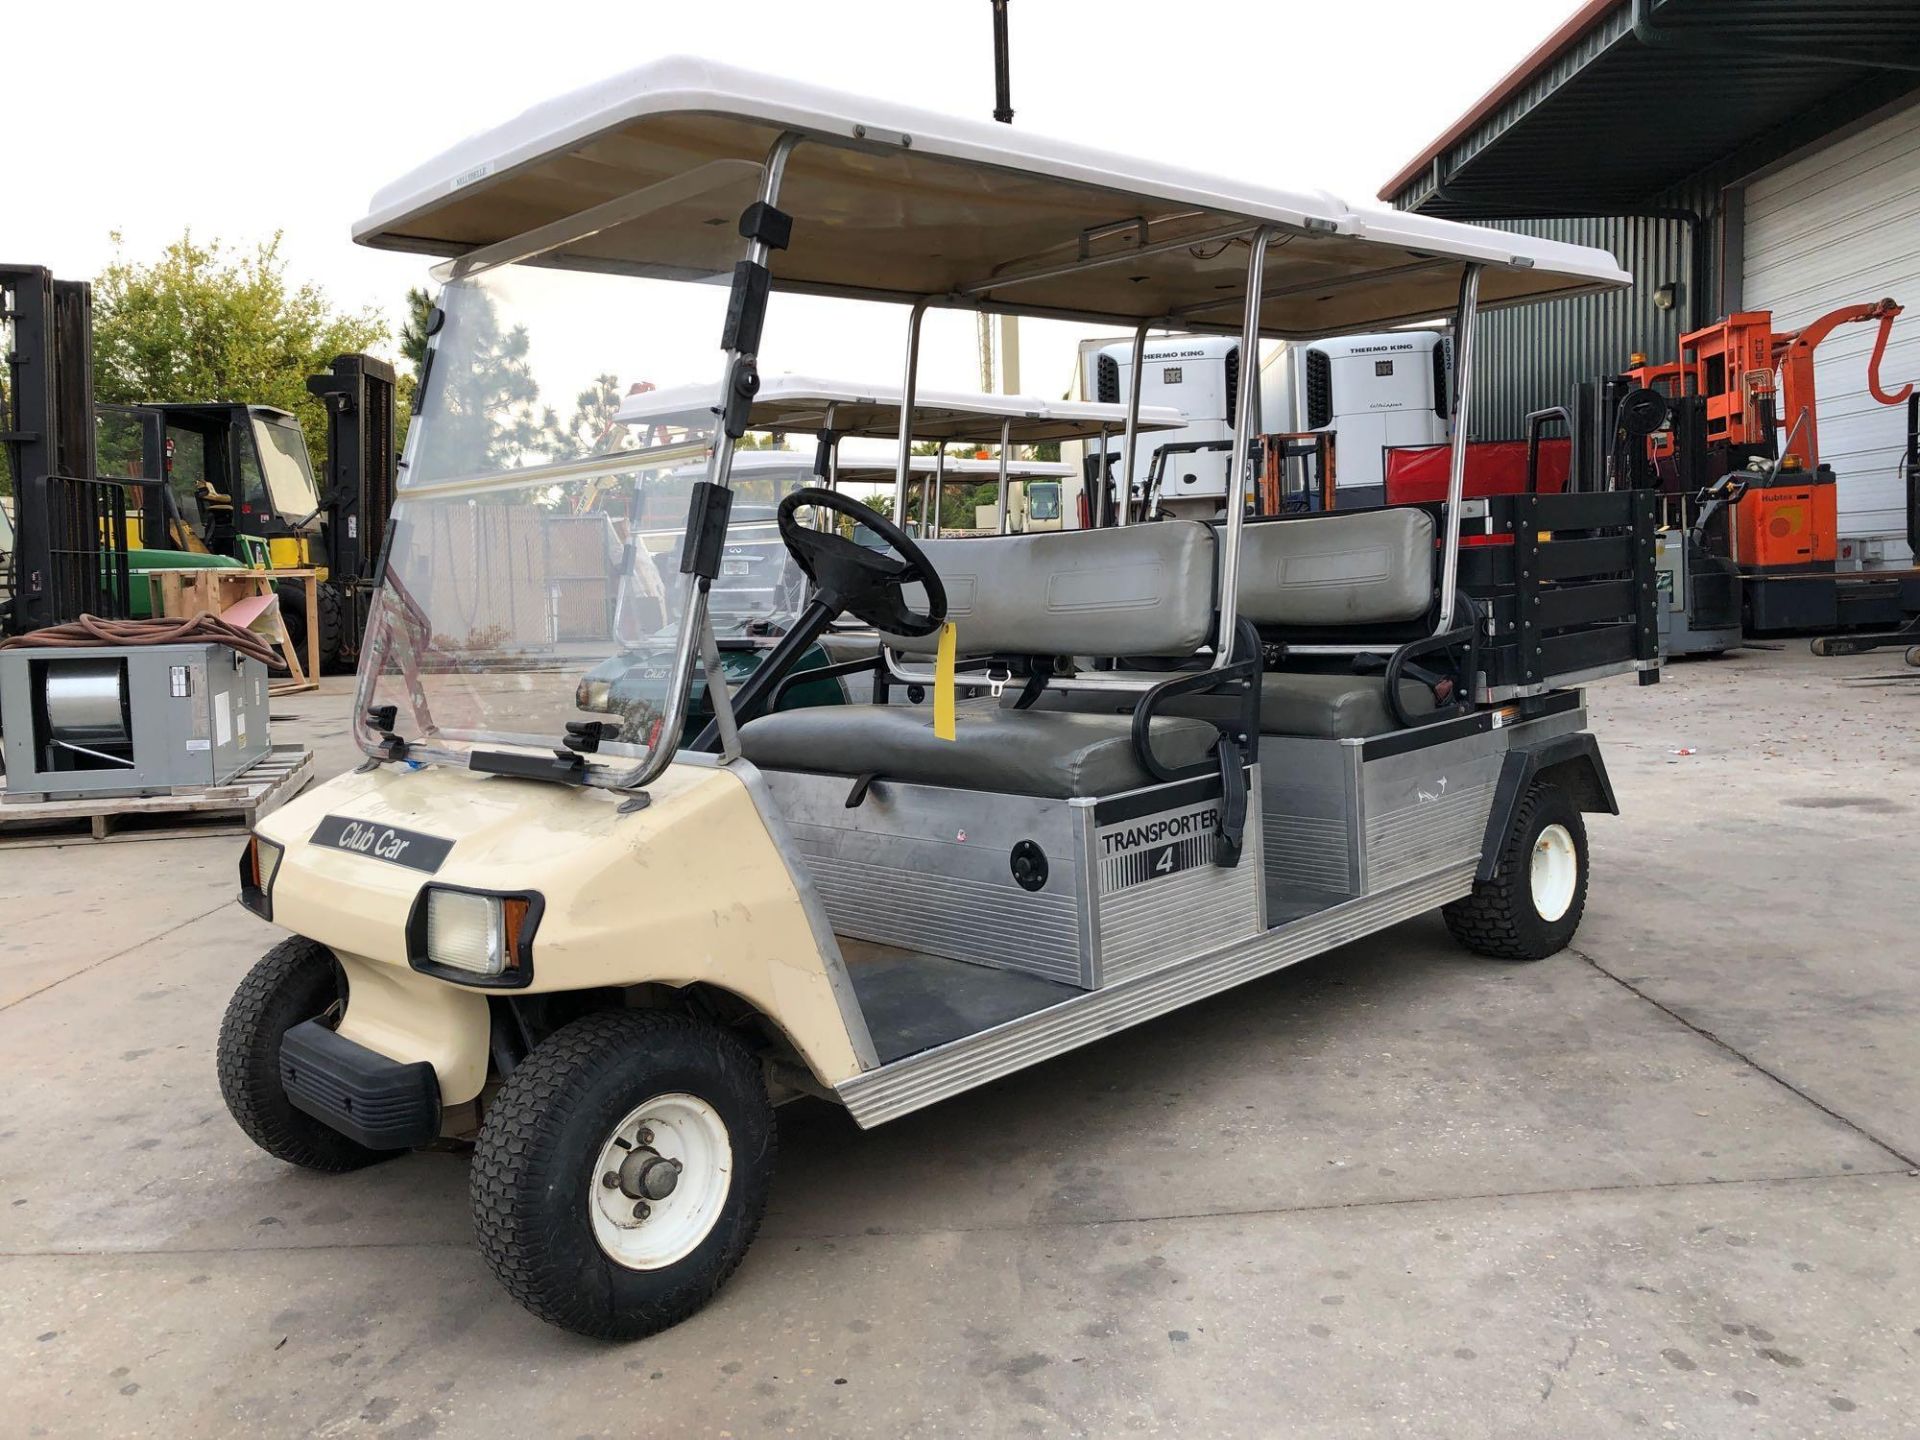 INGERSOLL RAND GAS POWERED CLUB CAR TRANSPORTER 4 UTILITY CART W/ BED, RUNS AND DRIVES